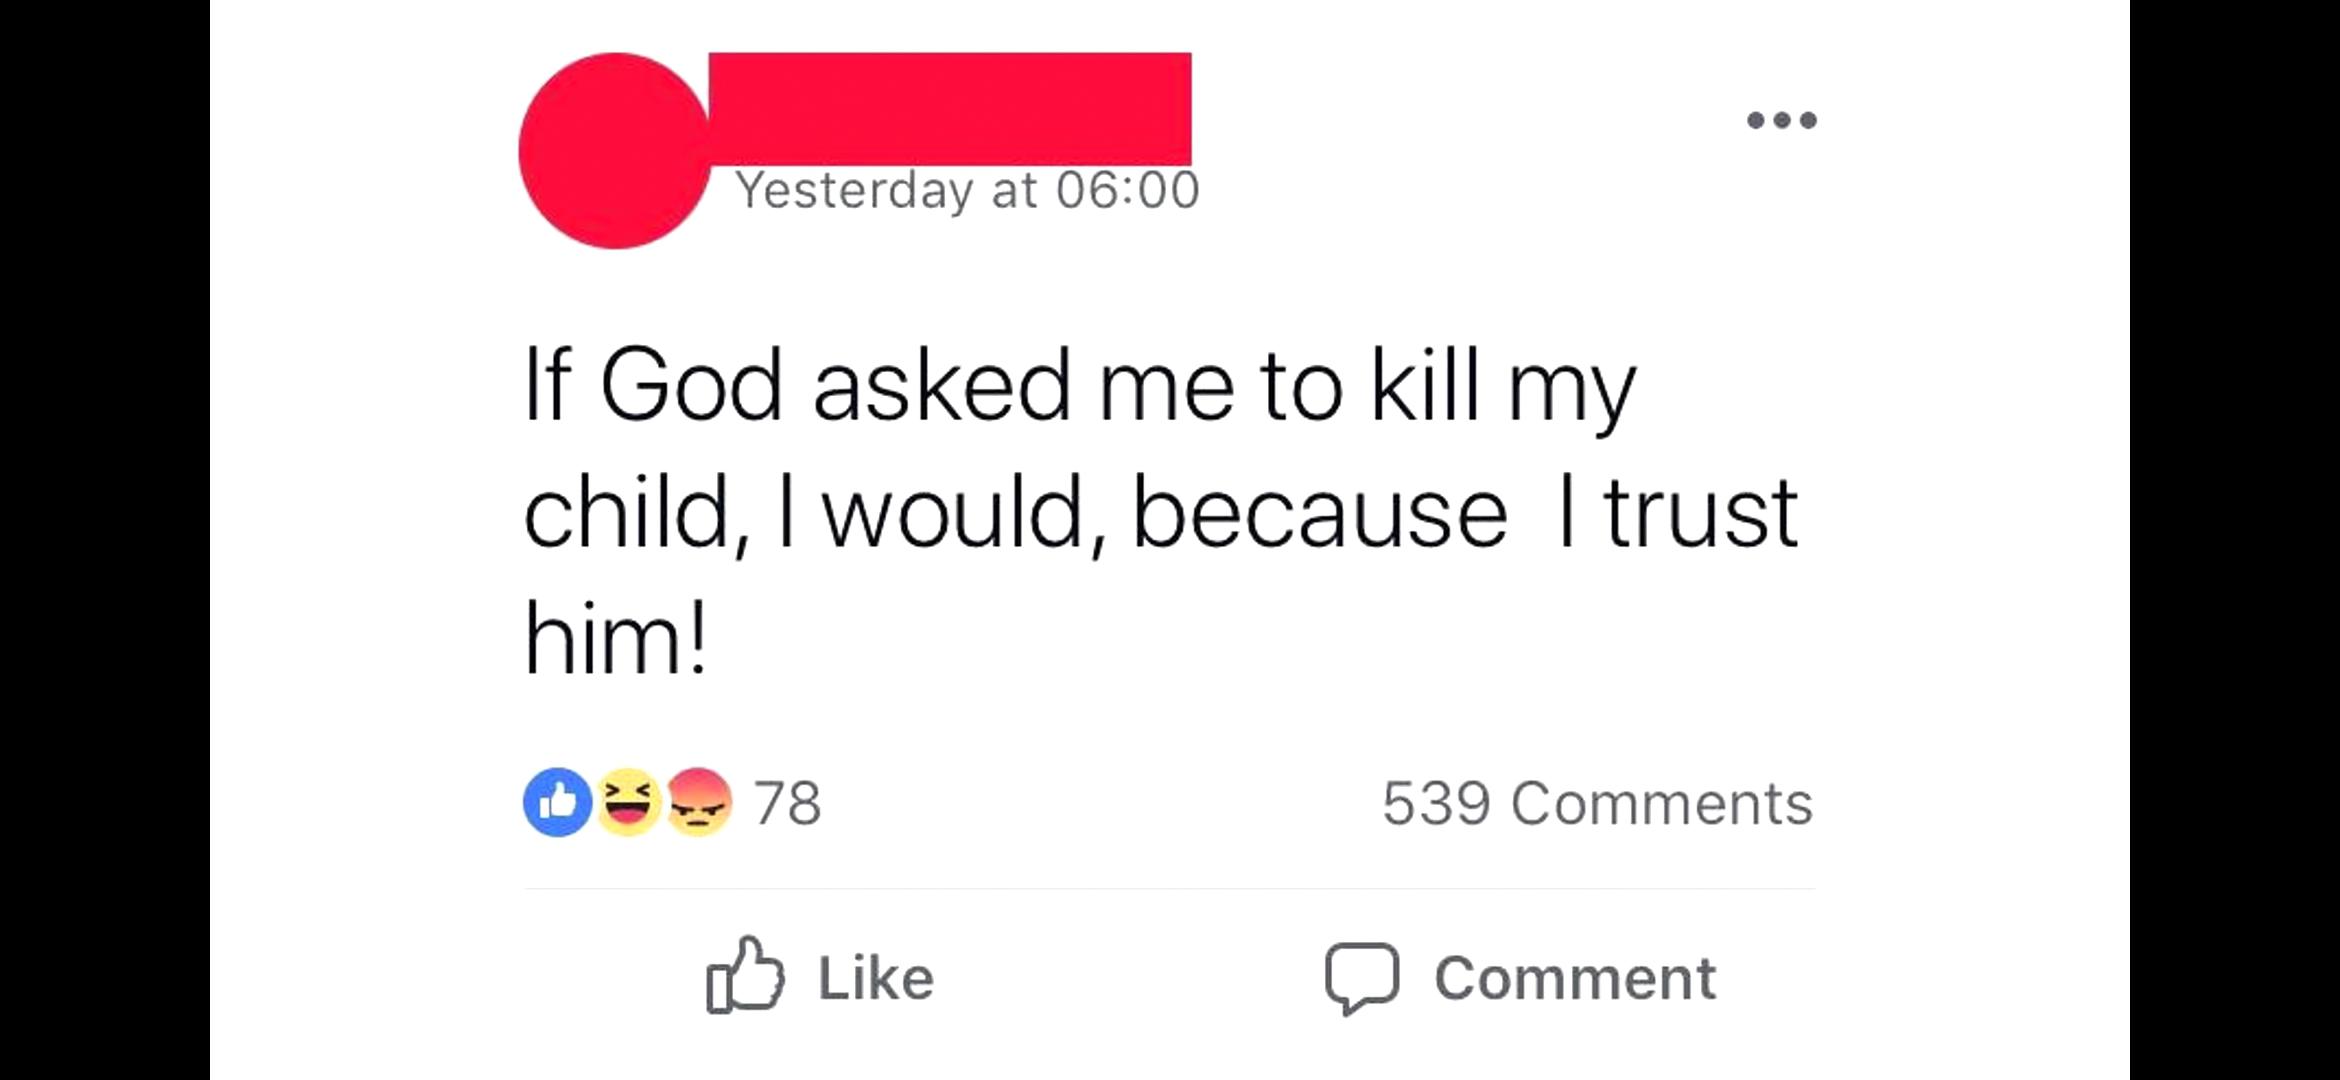 insane people facebook - Yesterday at If God asked me to kill my child, I would, because I trust him! 78 539 0 0 Comment